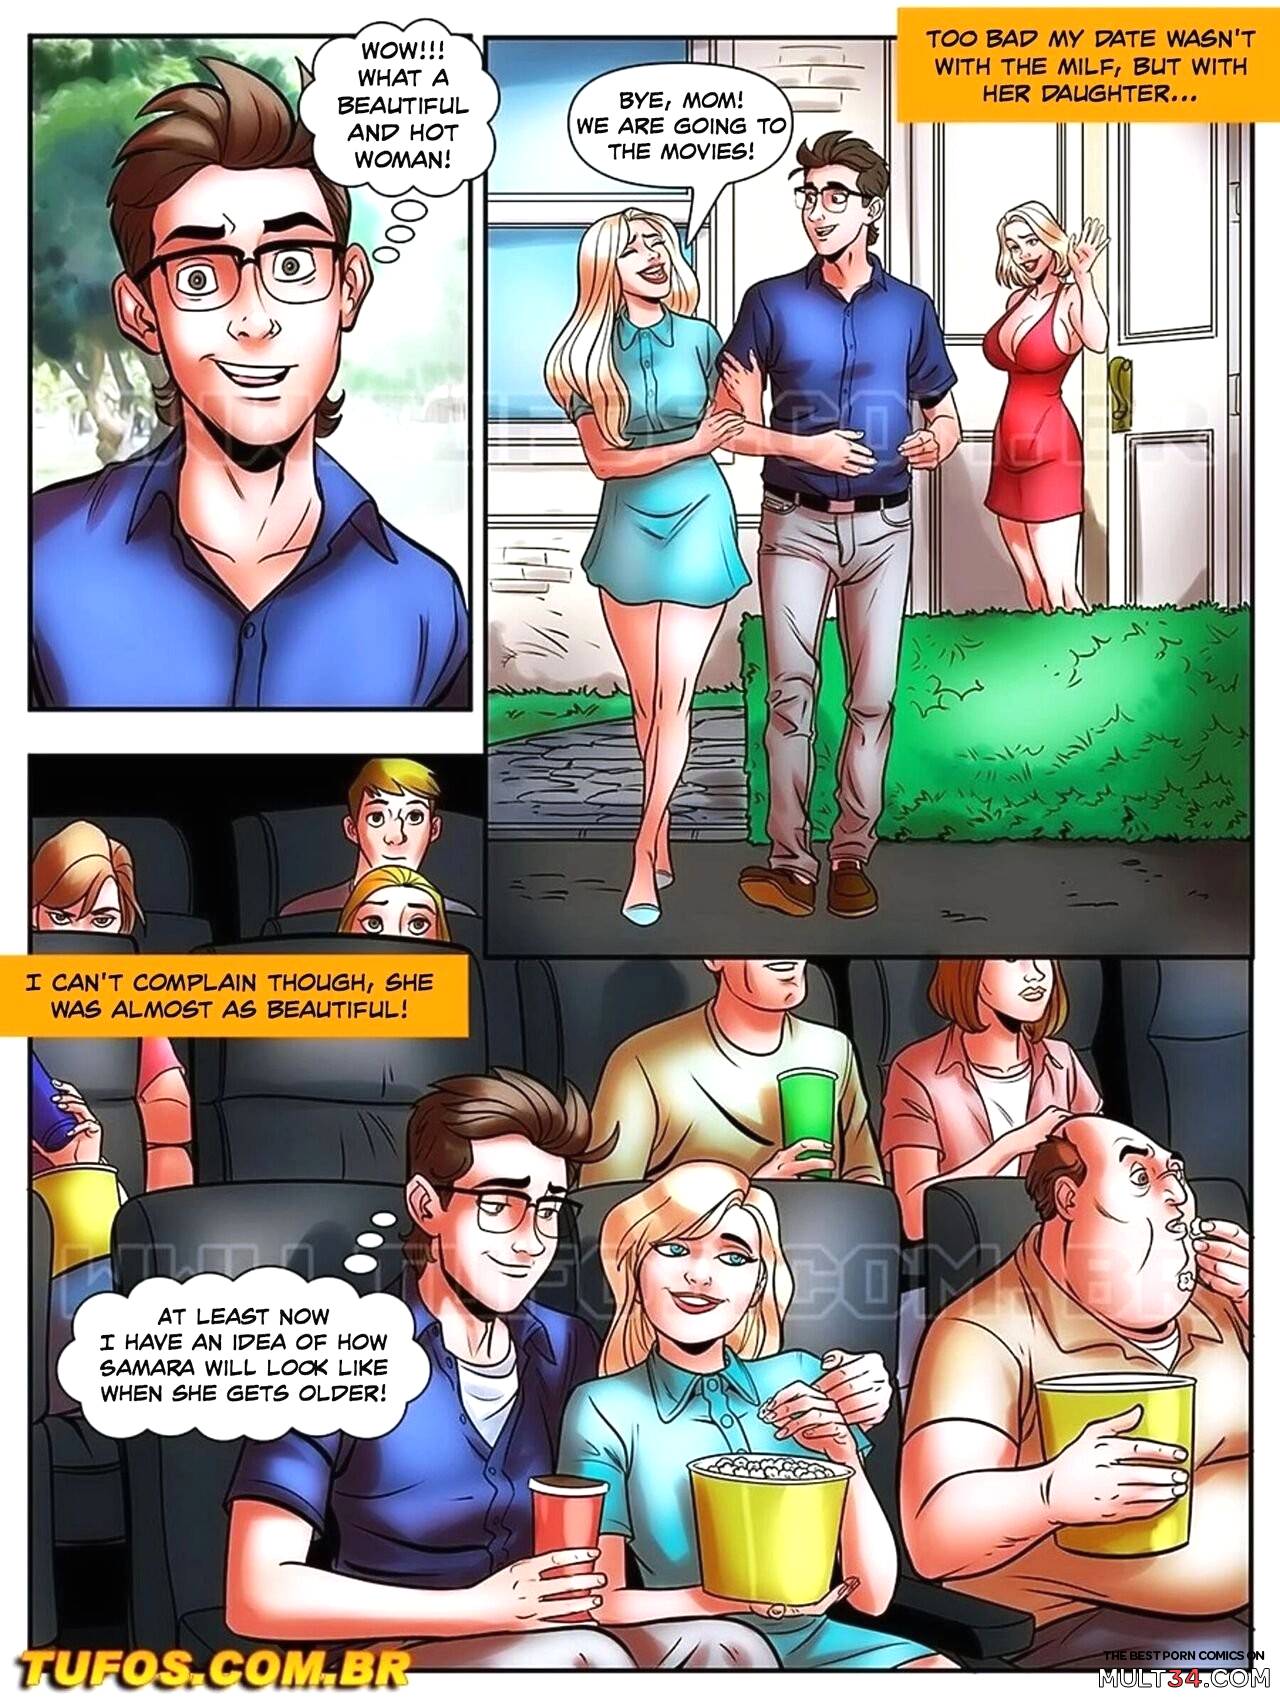 The Nerd Stallion 25 - Hunting women in Tinder page 6